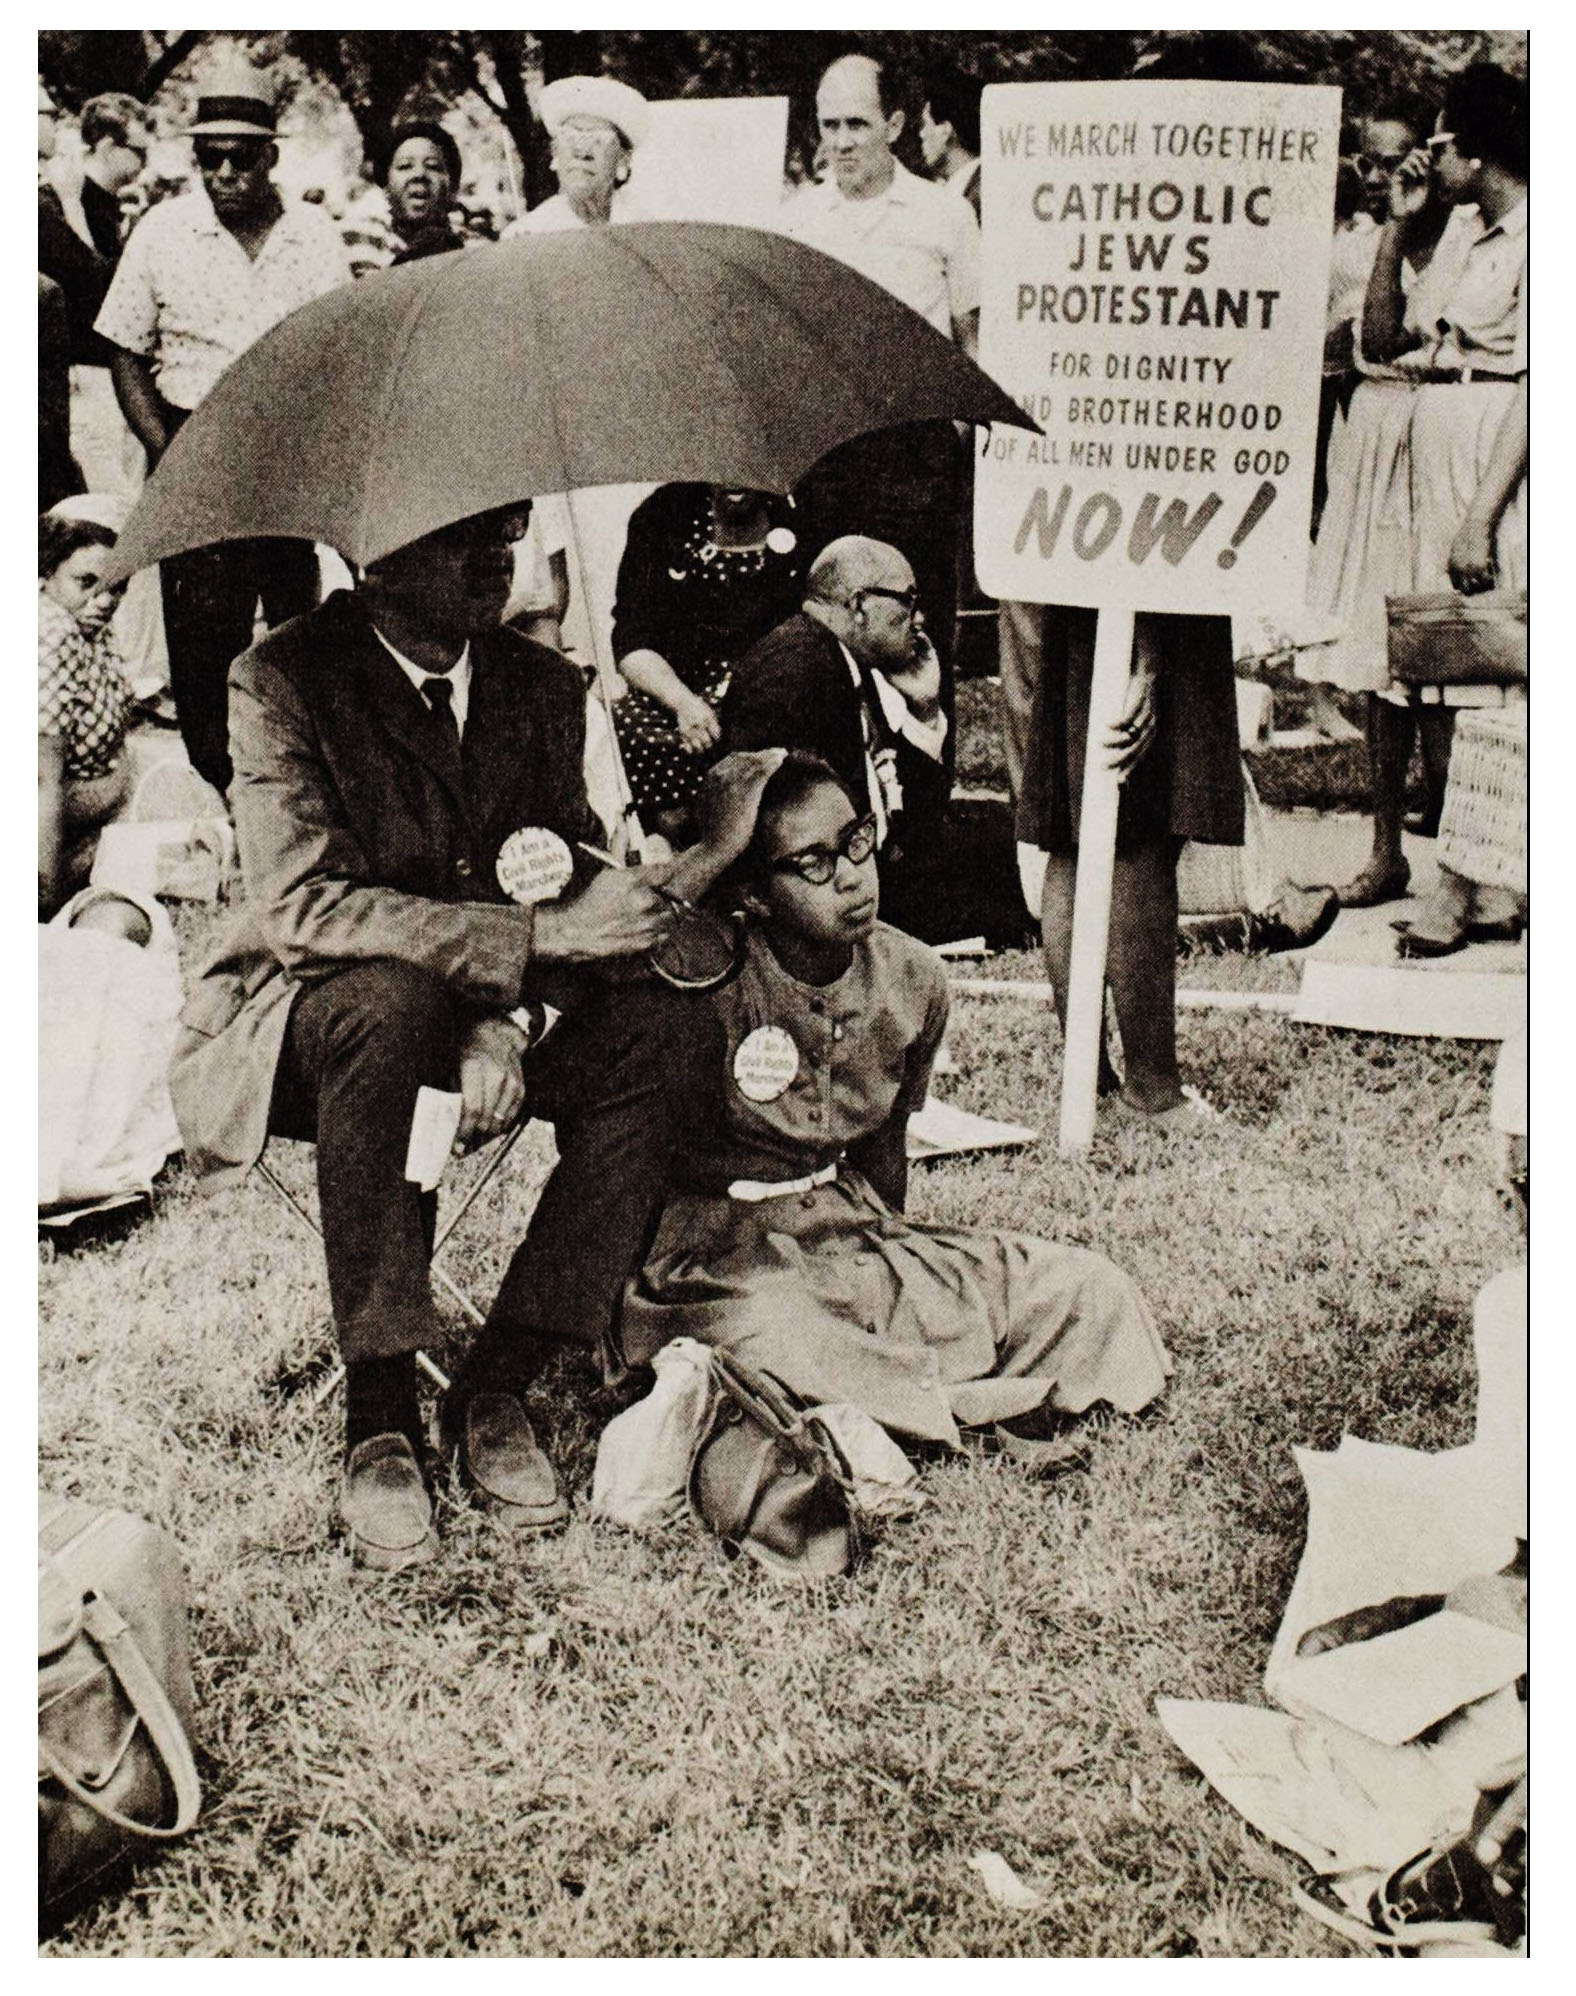 Black and white protestors sitting and standing with a sign that says 'We march together, Catholic Jews Protestants'.